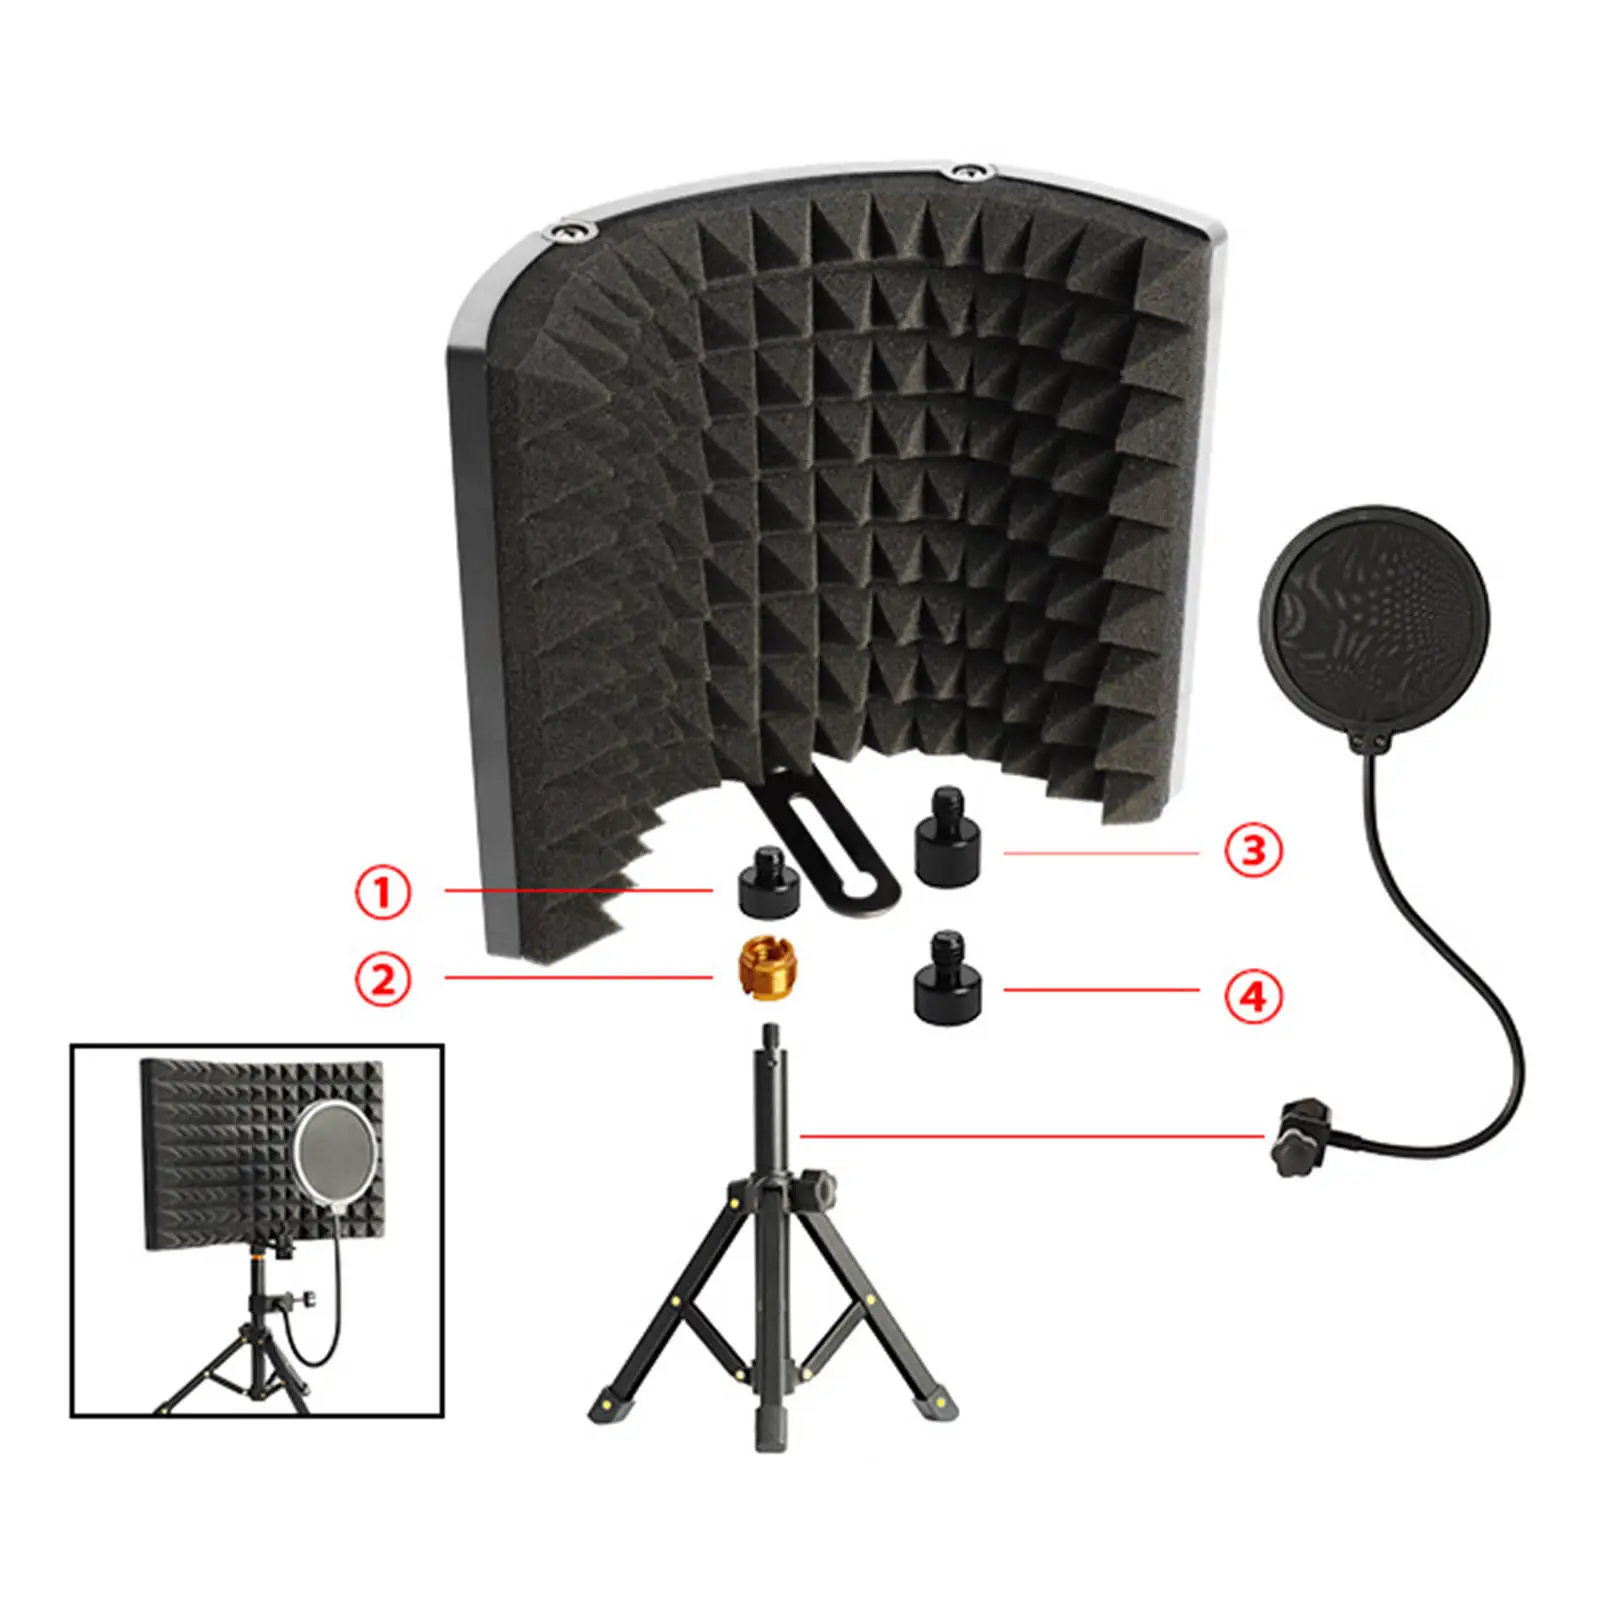 Microphone Isolation Shield 3 Panel with Stand Sound-proof Plate Acoustic Foams Panel Foam for Studio Recording Vocals